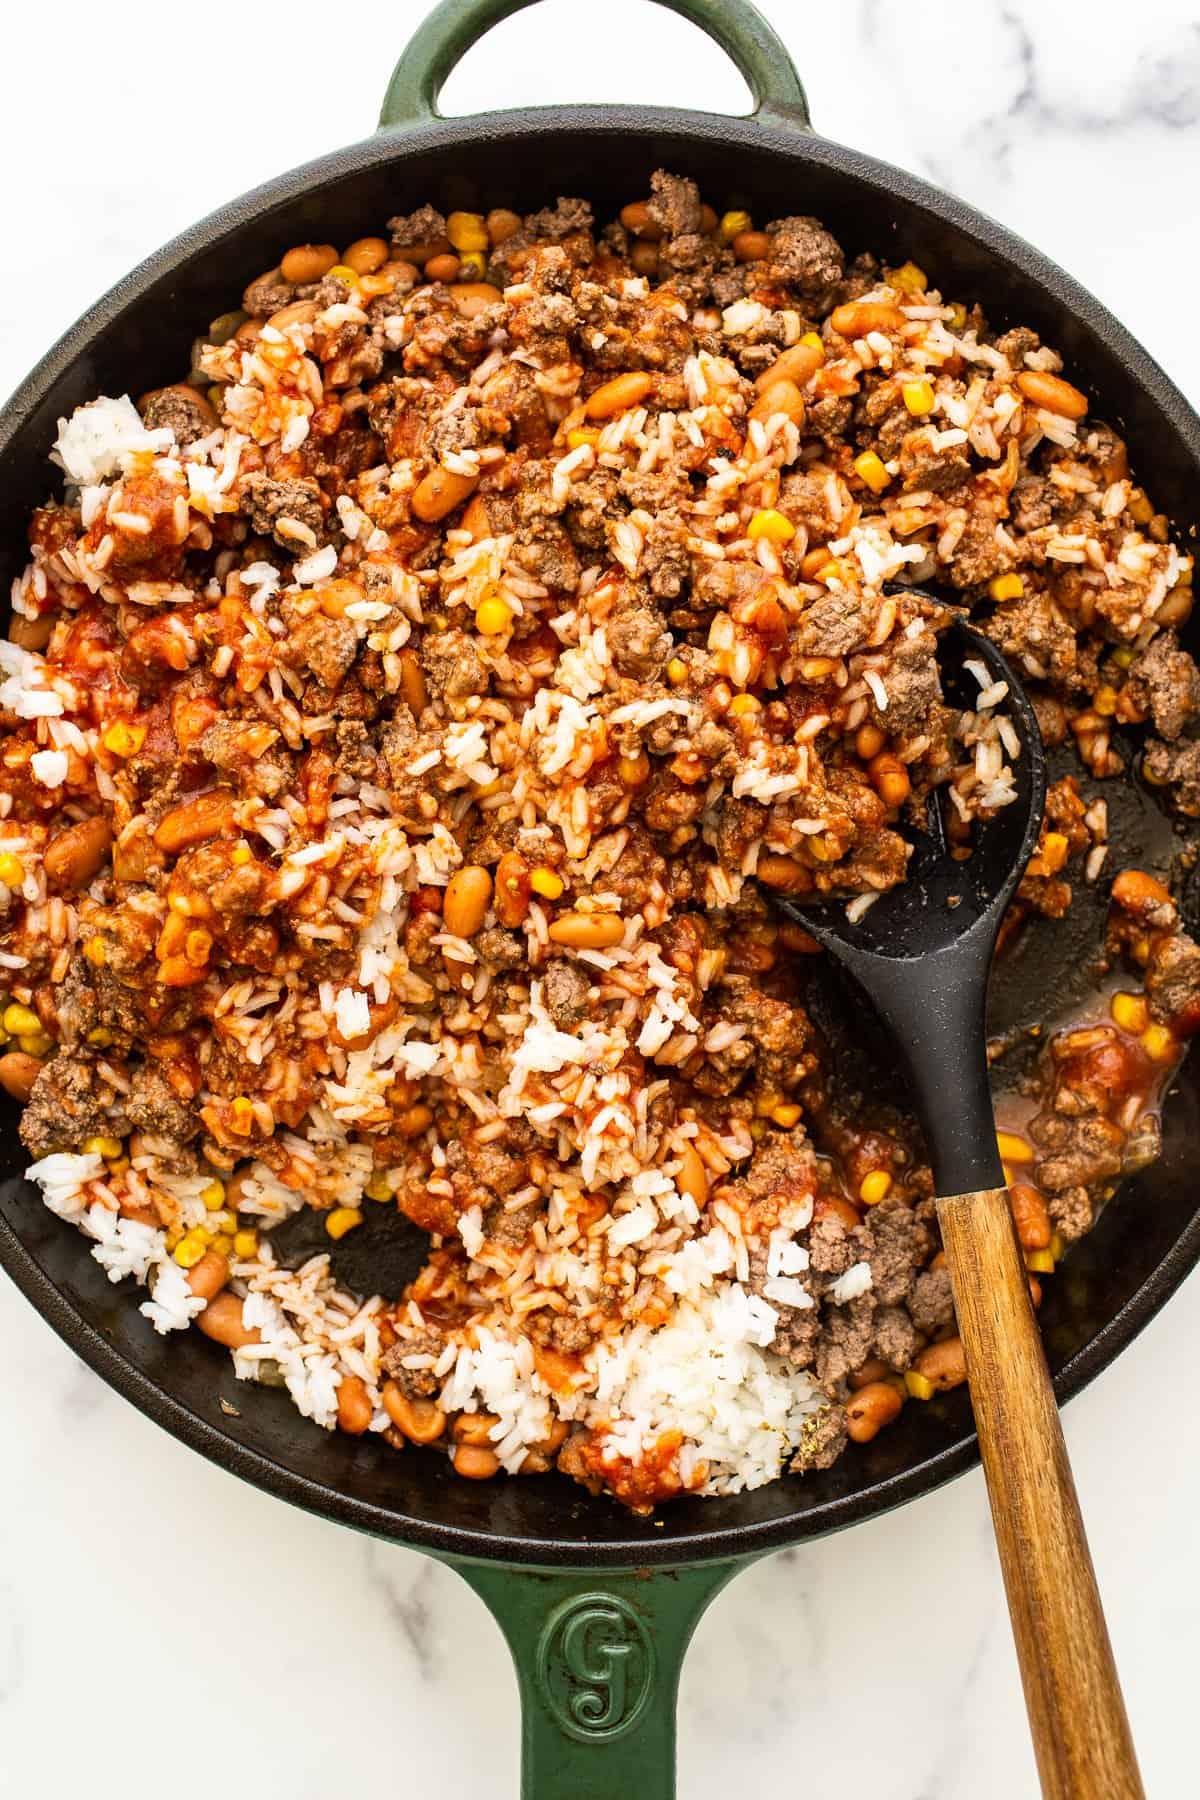 Rice, beans and ground beef in a cast iron skillet.